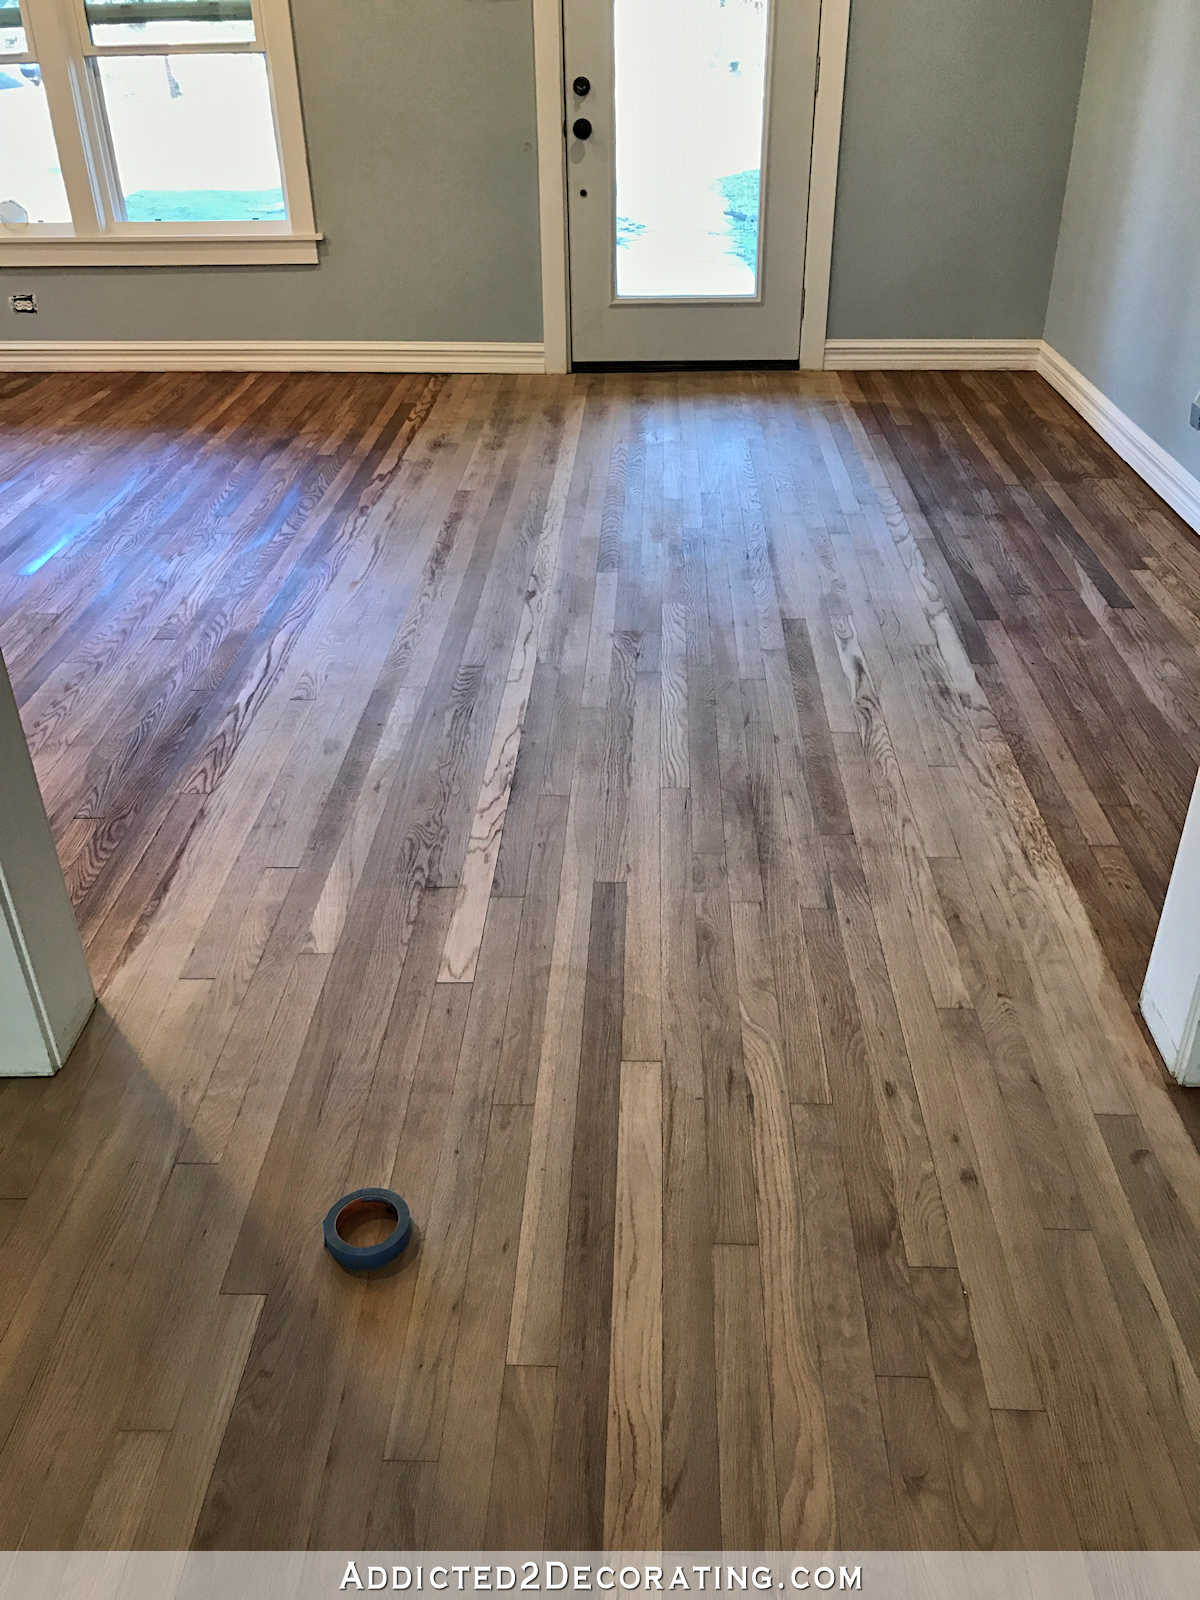 30 Spectacular Estimate to Refinish Hardwood Floors 2024 free download estimate to refinish hardwood floors of adventures in staining my red oak hardwood floors products process pertaining to staining red oak hardwood floors 4 entryway and living room wood cond